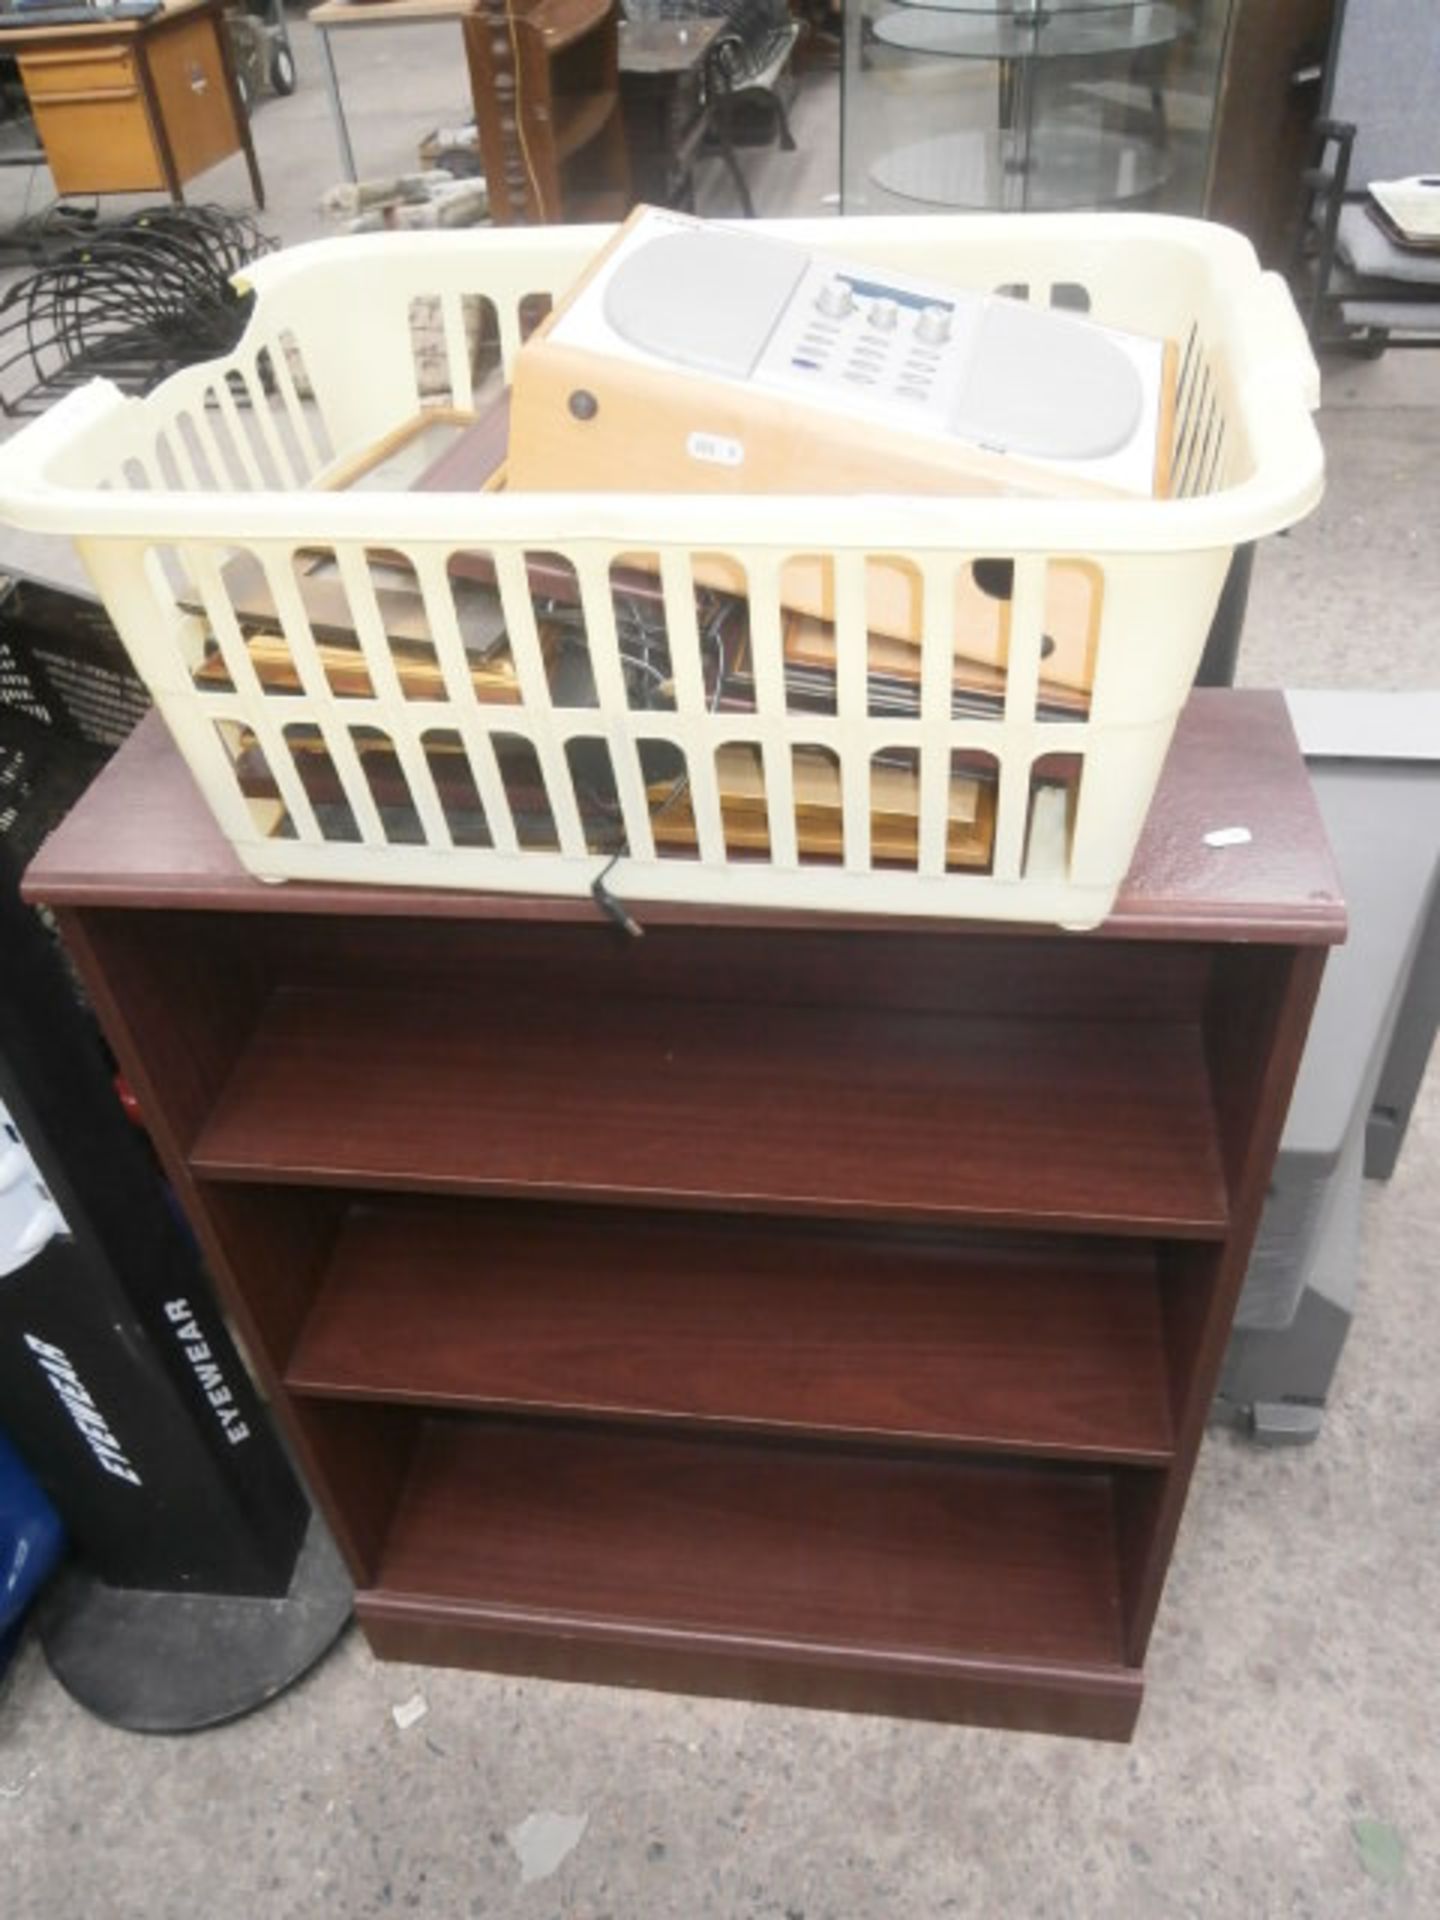 Small bookcase and a basket containing digital radio and picture frames